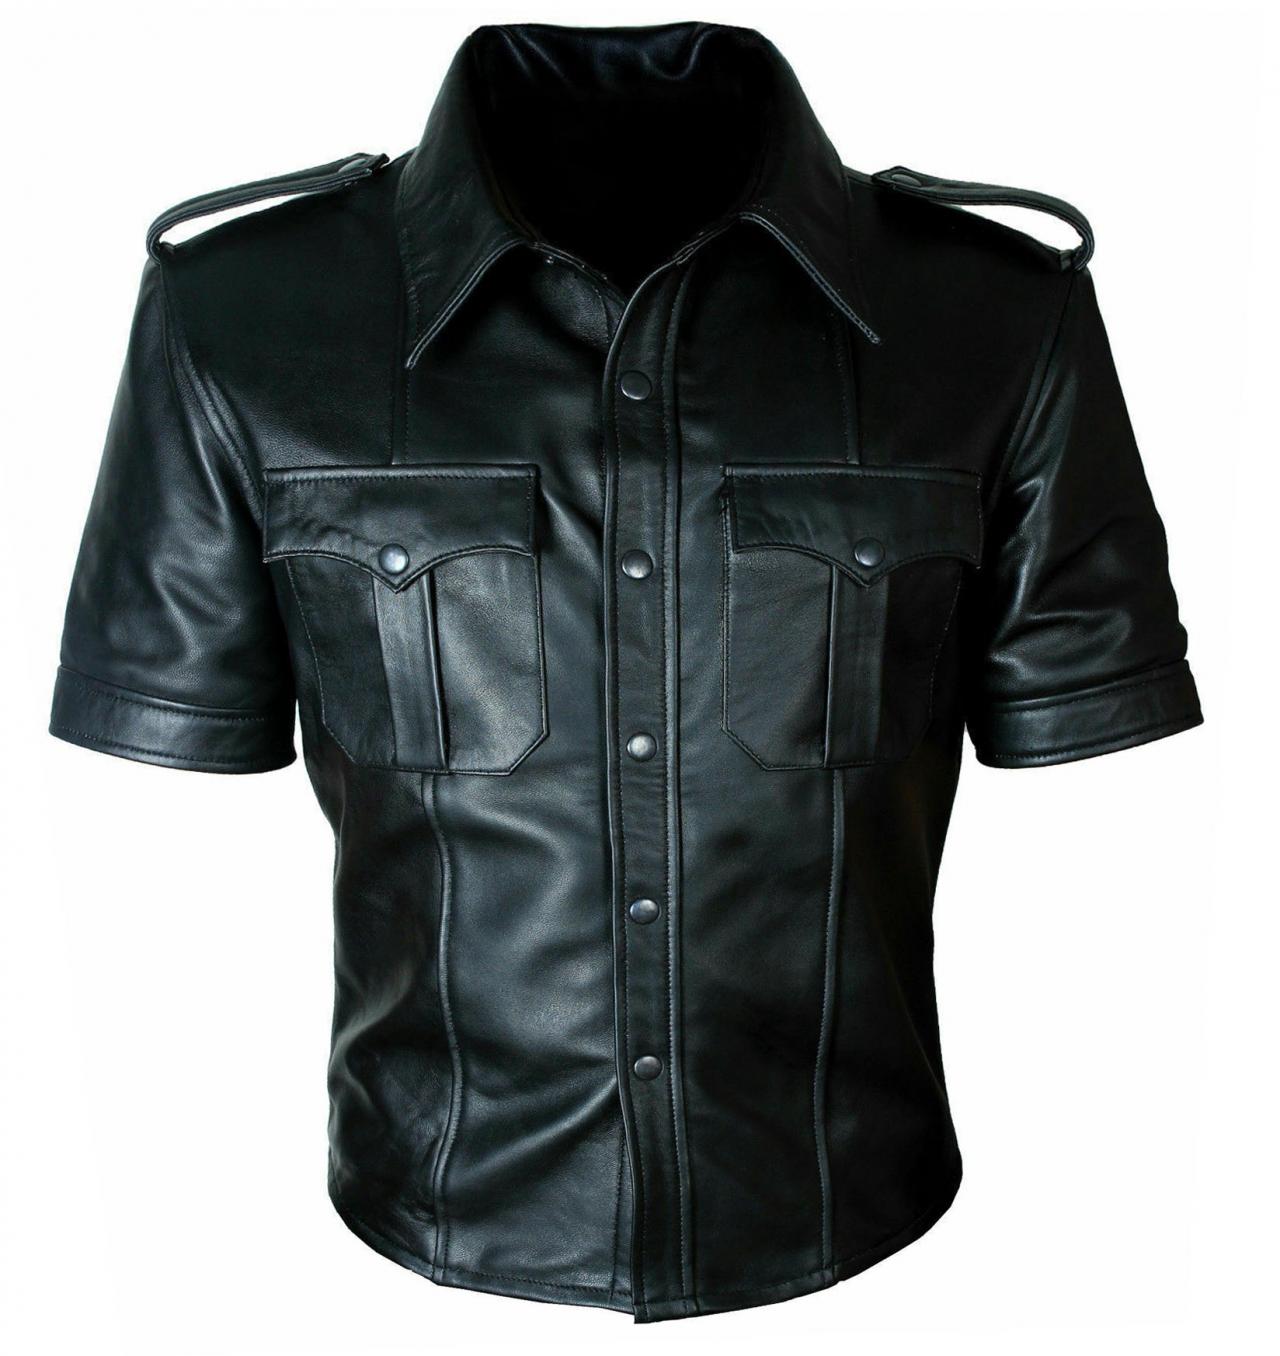 Men's Real Genuine Leather Police Uniform Shirt Sexy Short Sleeve Leather Shirt2